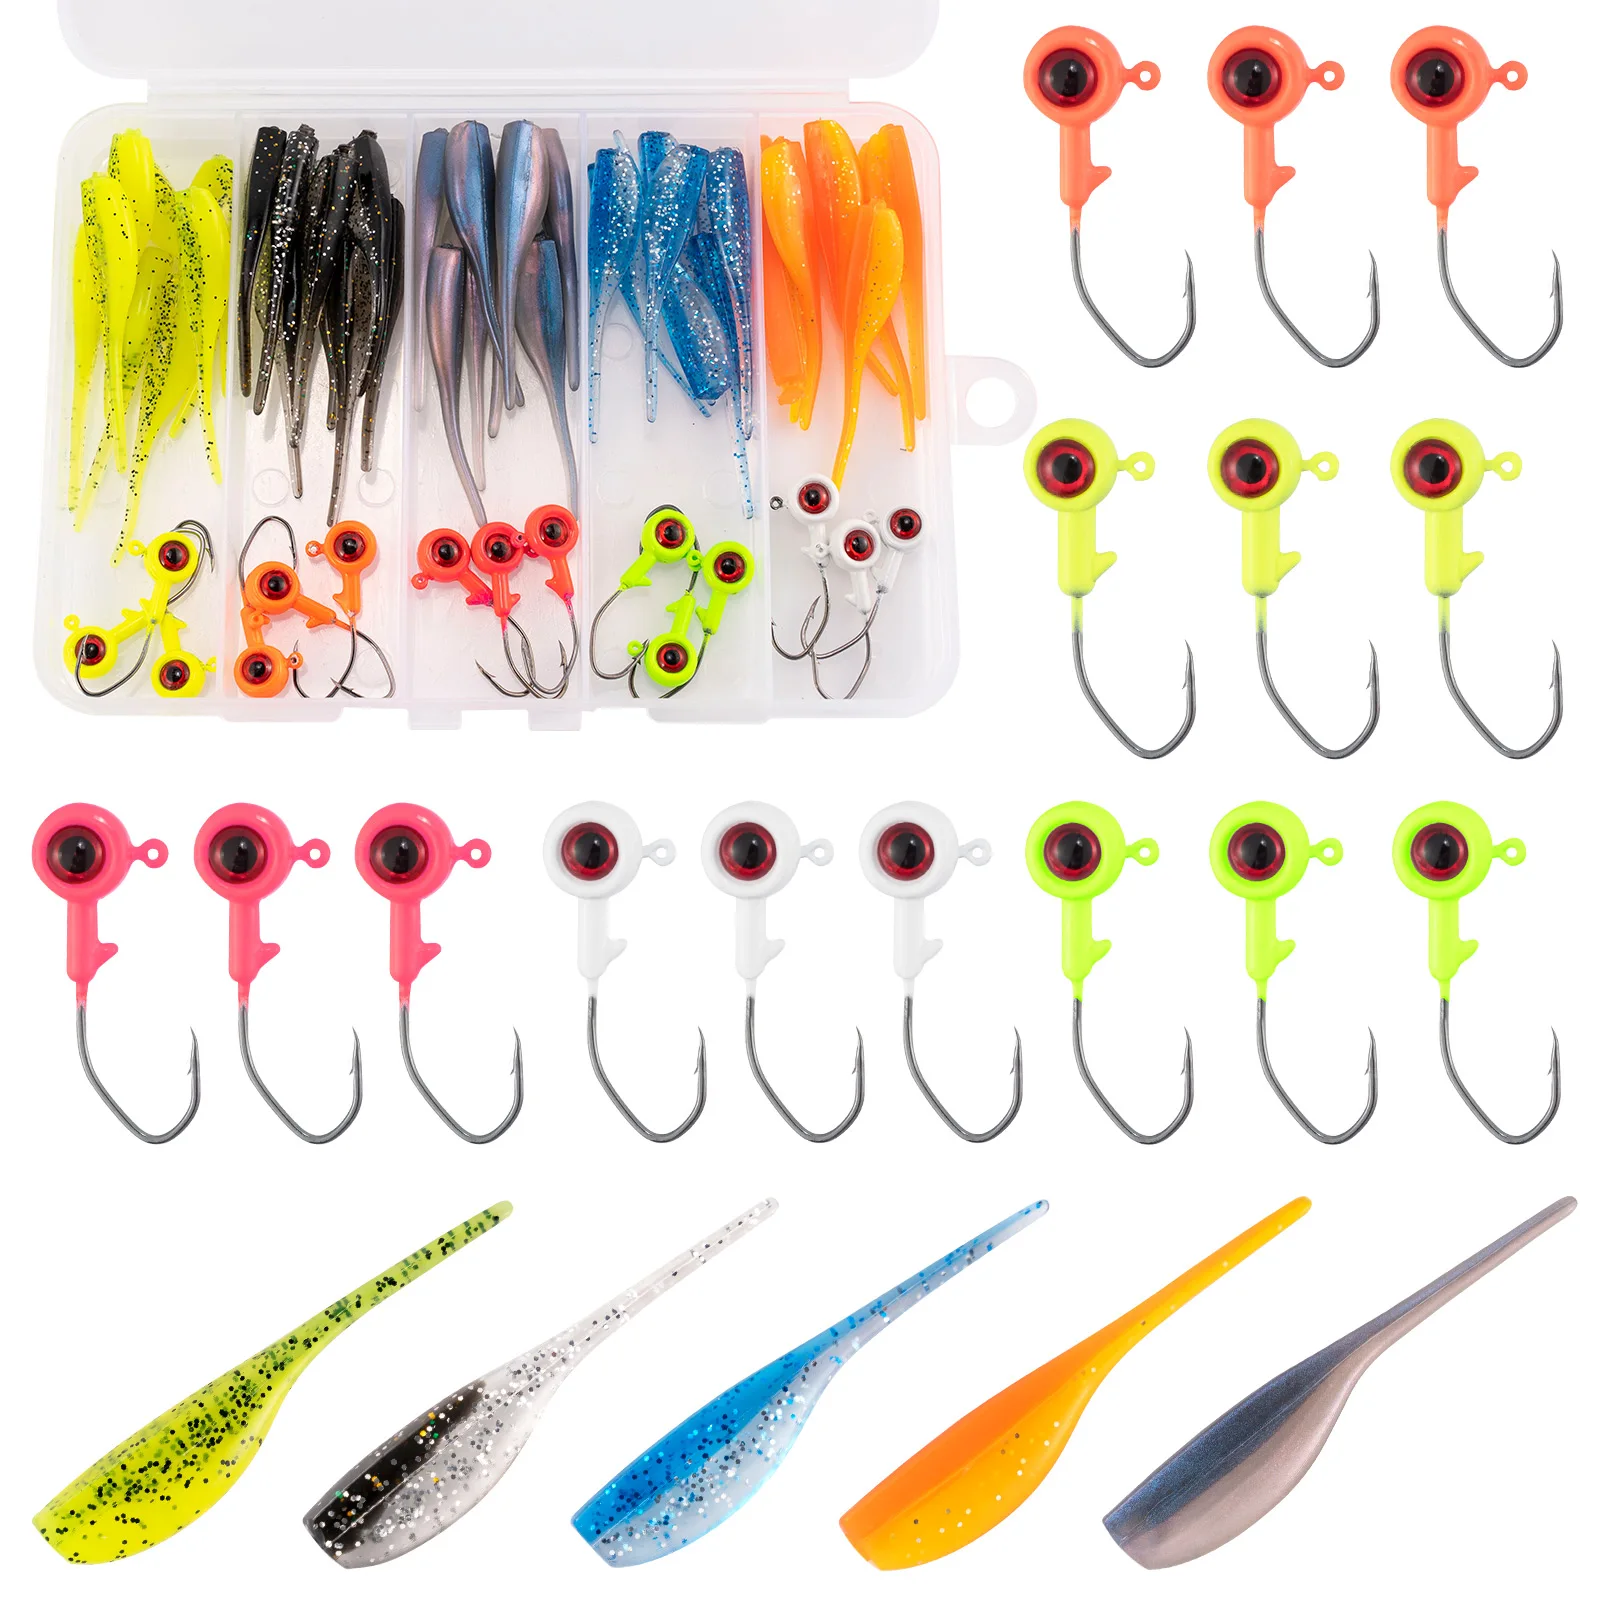 

55pcs Crappie Lures Kit Jig Head Hook Soft Plastic Lure Bait Grub Worm Bass Bluegill Panfish Fishing Jig with Tackle Box Trout